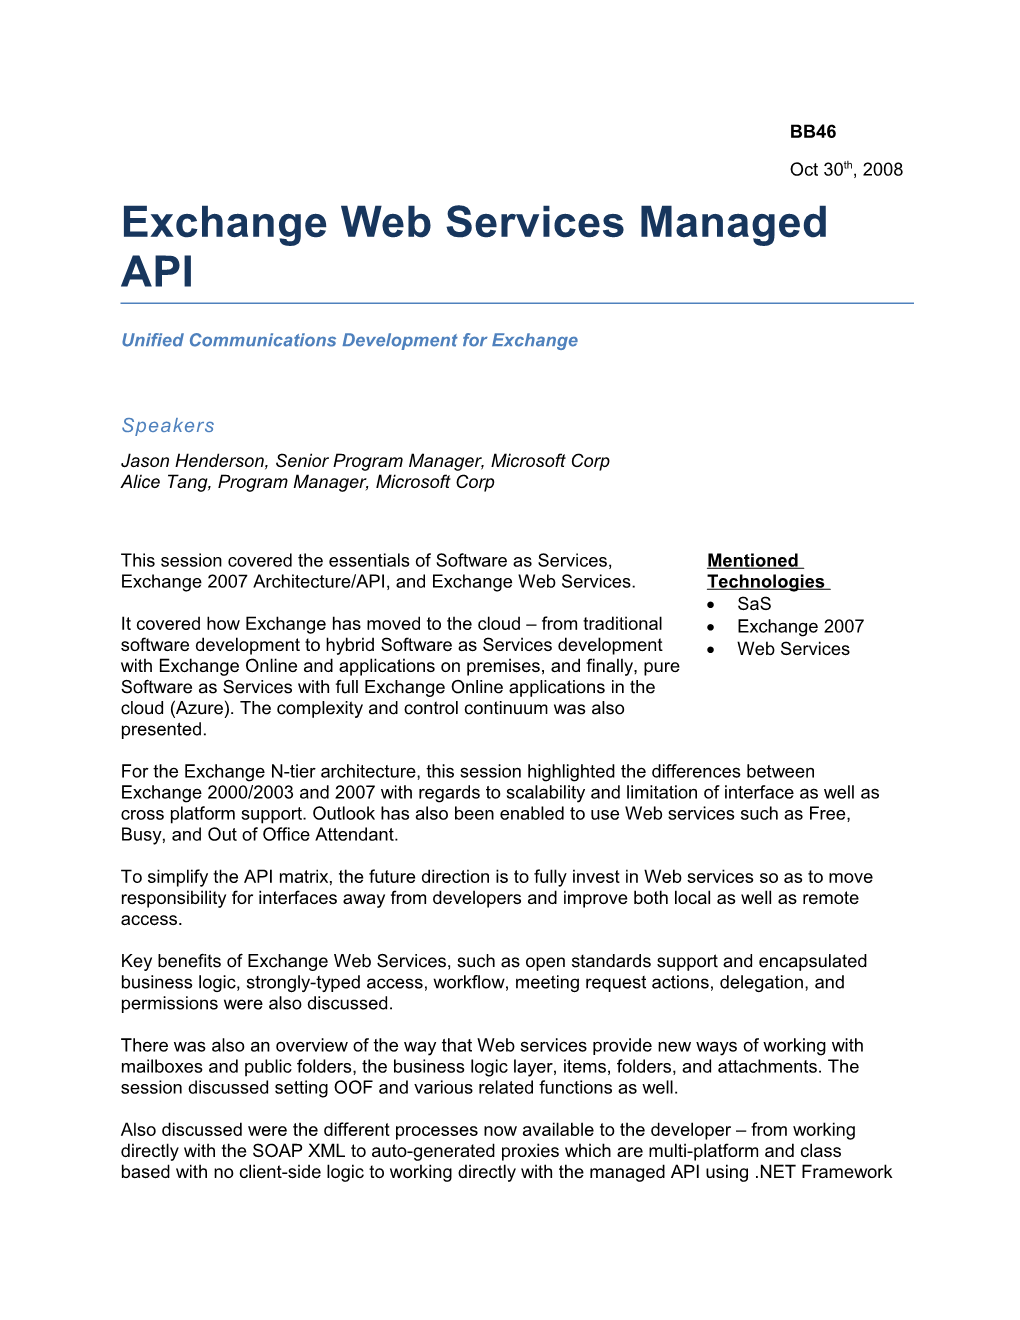 This Session Provided a Good Overview of Key Benefits of the Exchange Web Services Managed